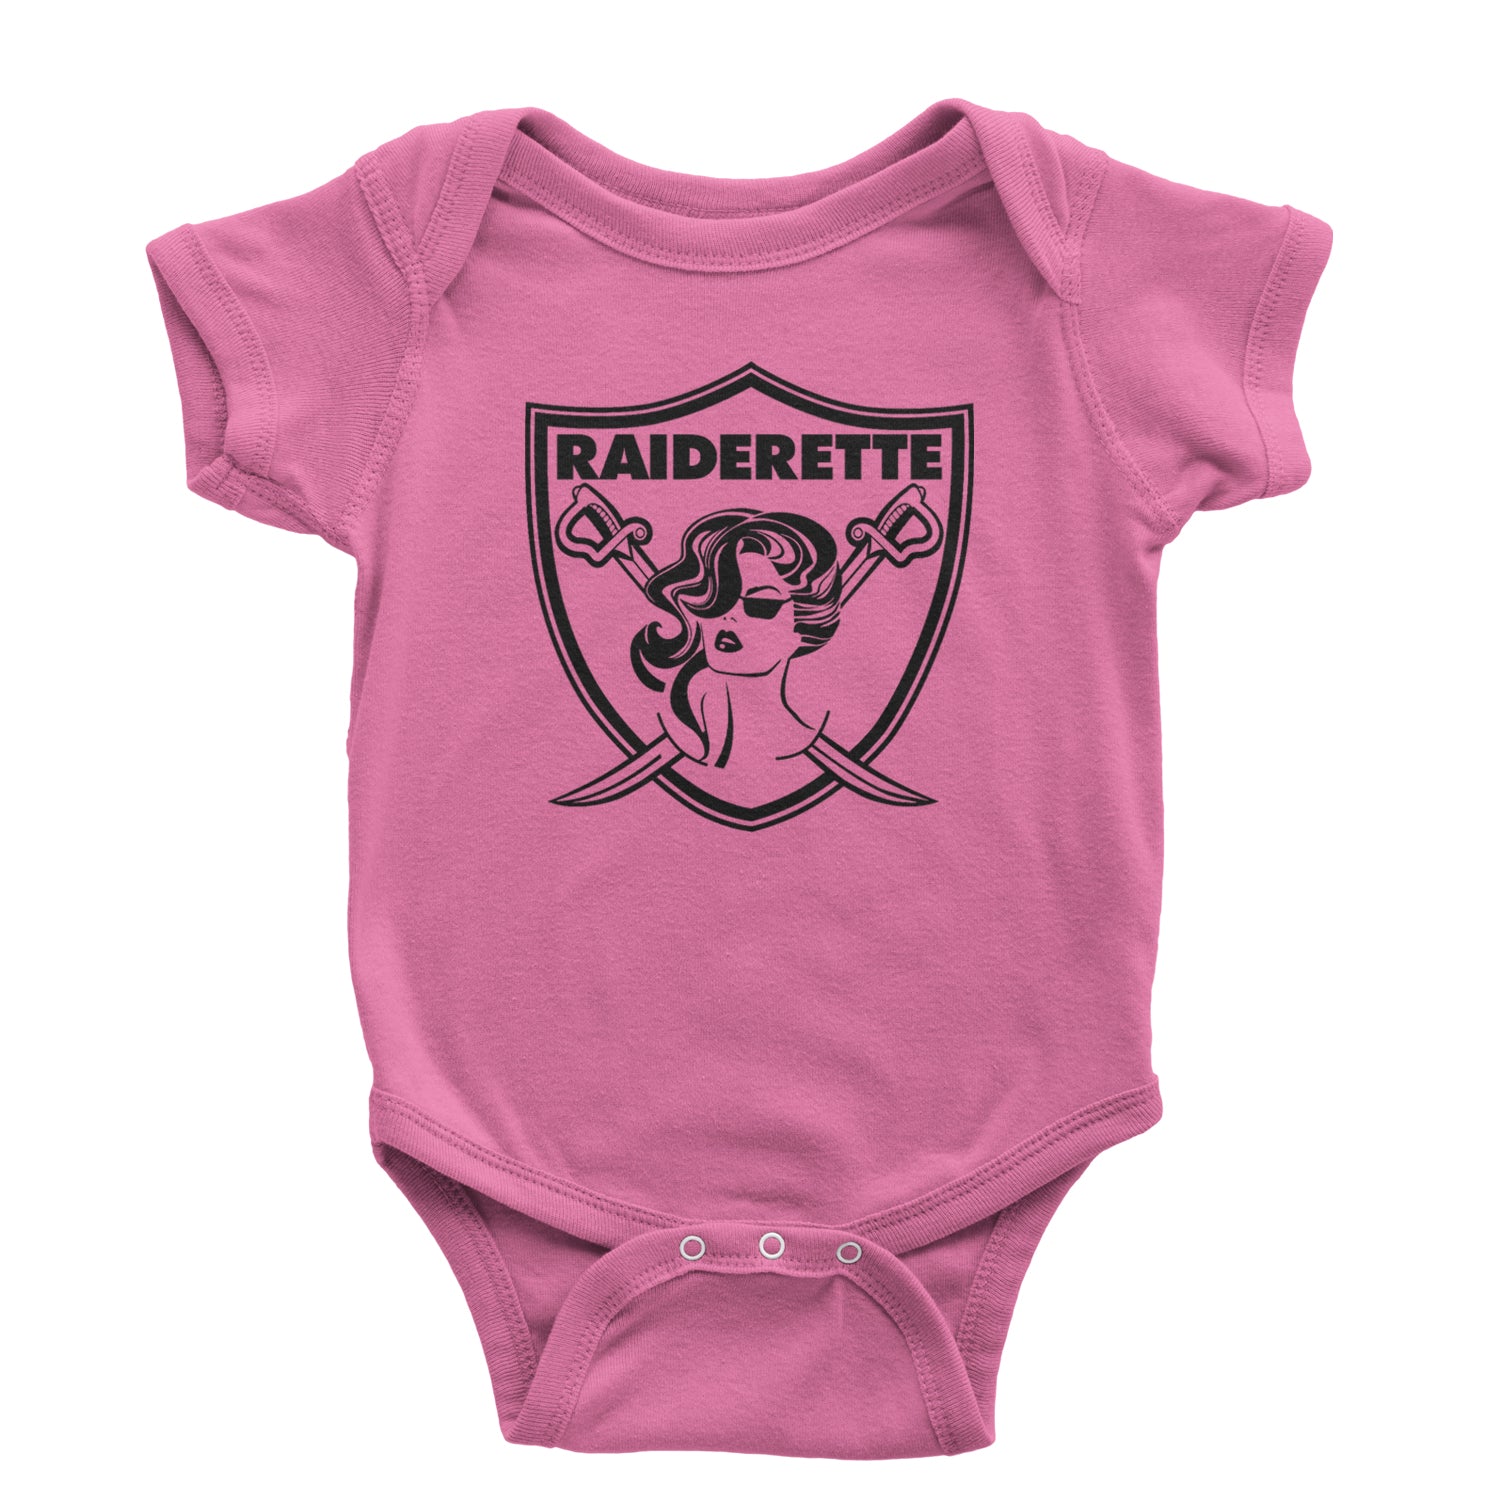 Raiderette Football Gameday Ready Infant One-Piece Romper Bodysuit and Toddler T-shirt